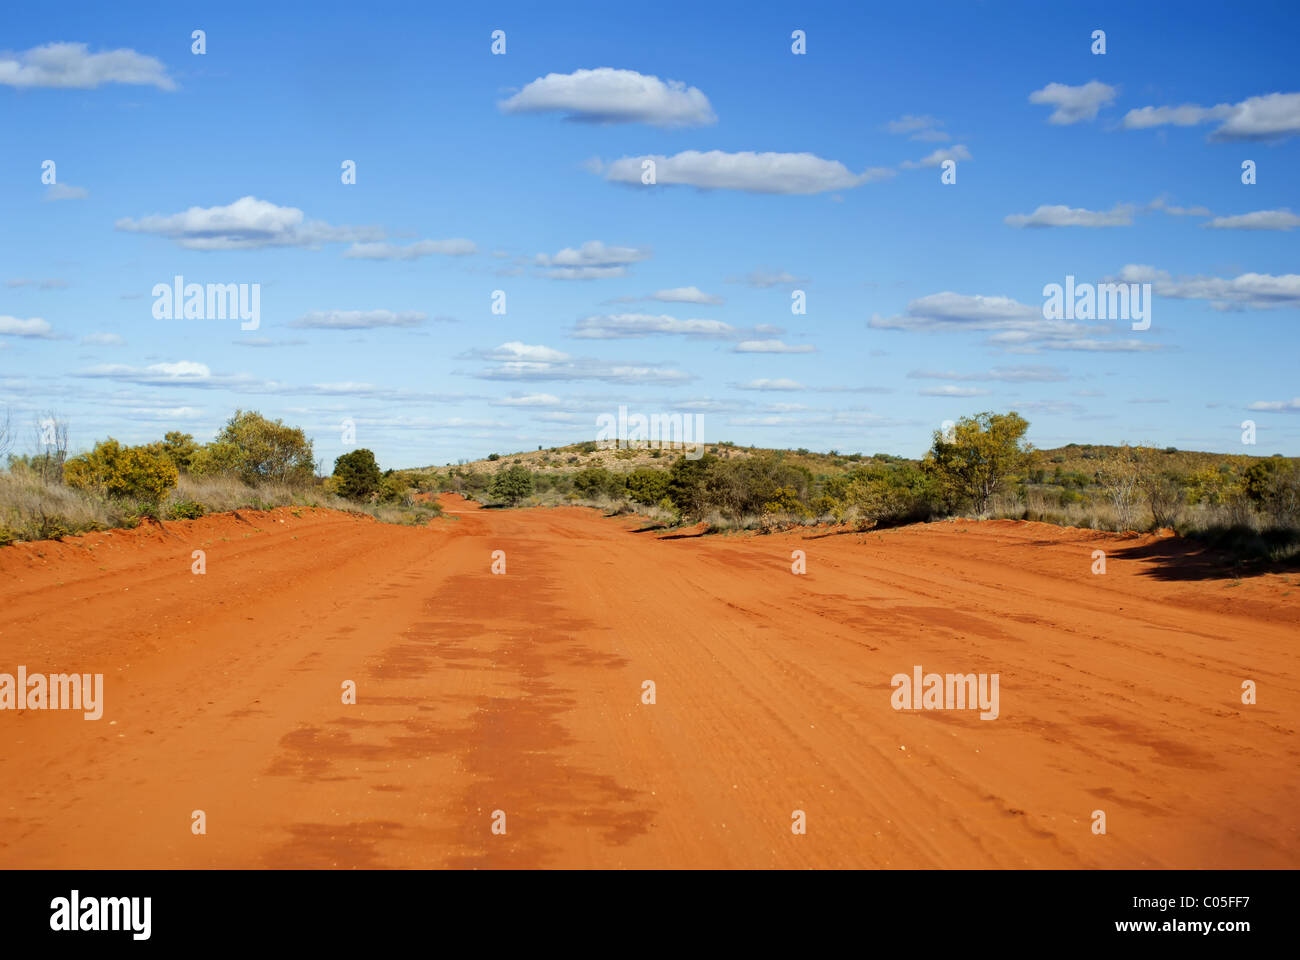 Deserted sandy outback track Stock Photo